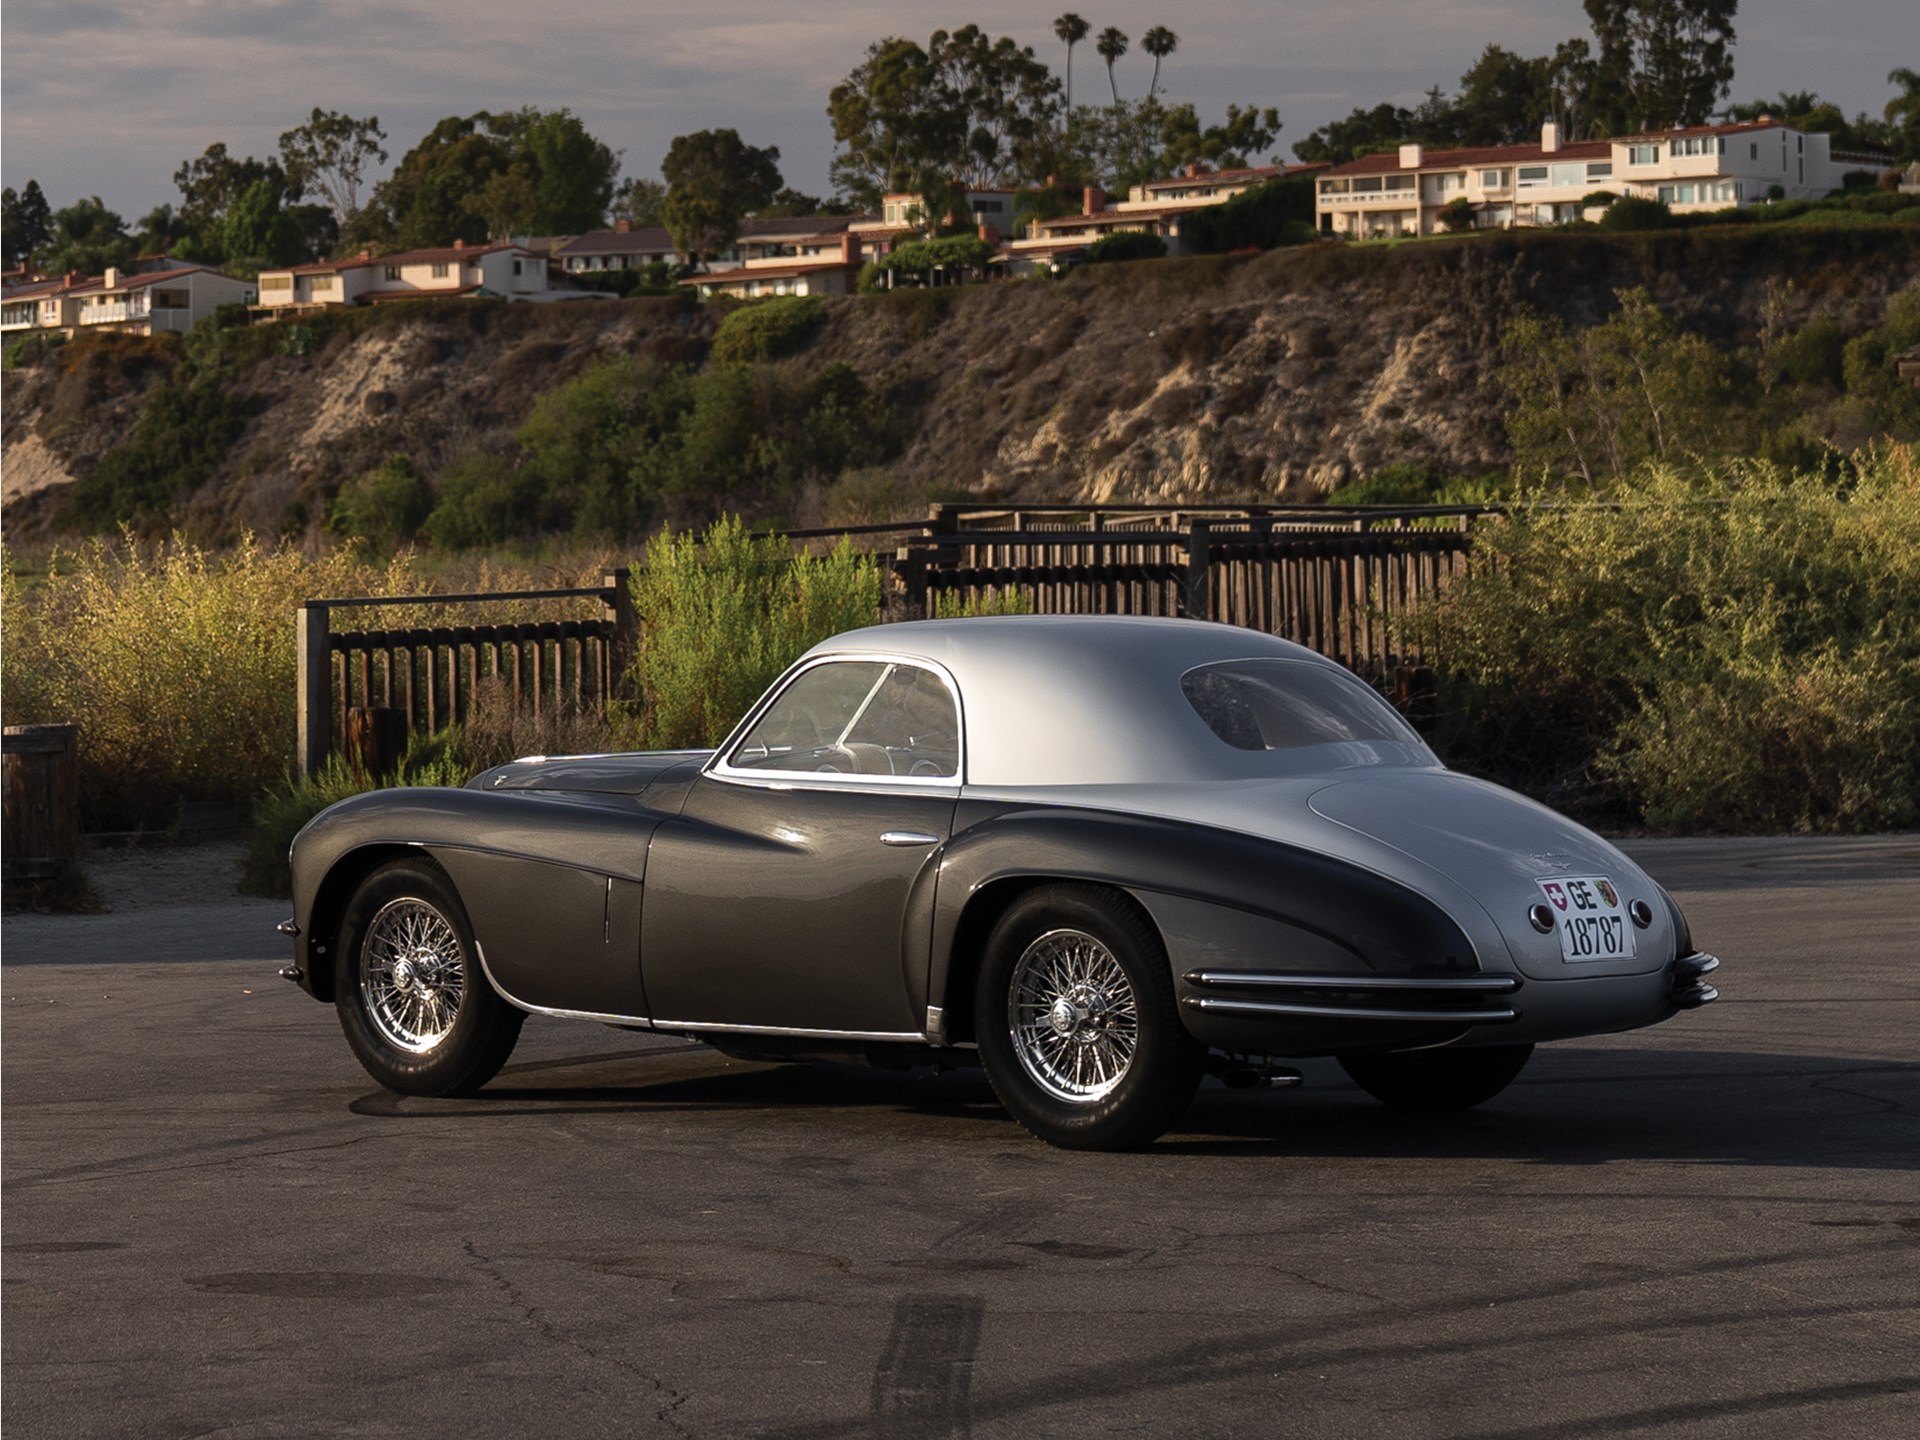 RM Sotheby's - 1949 Alfa Romeo 6C 2500 Super Sport Coupe by Touring